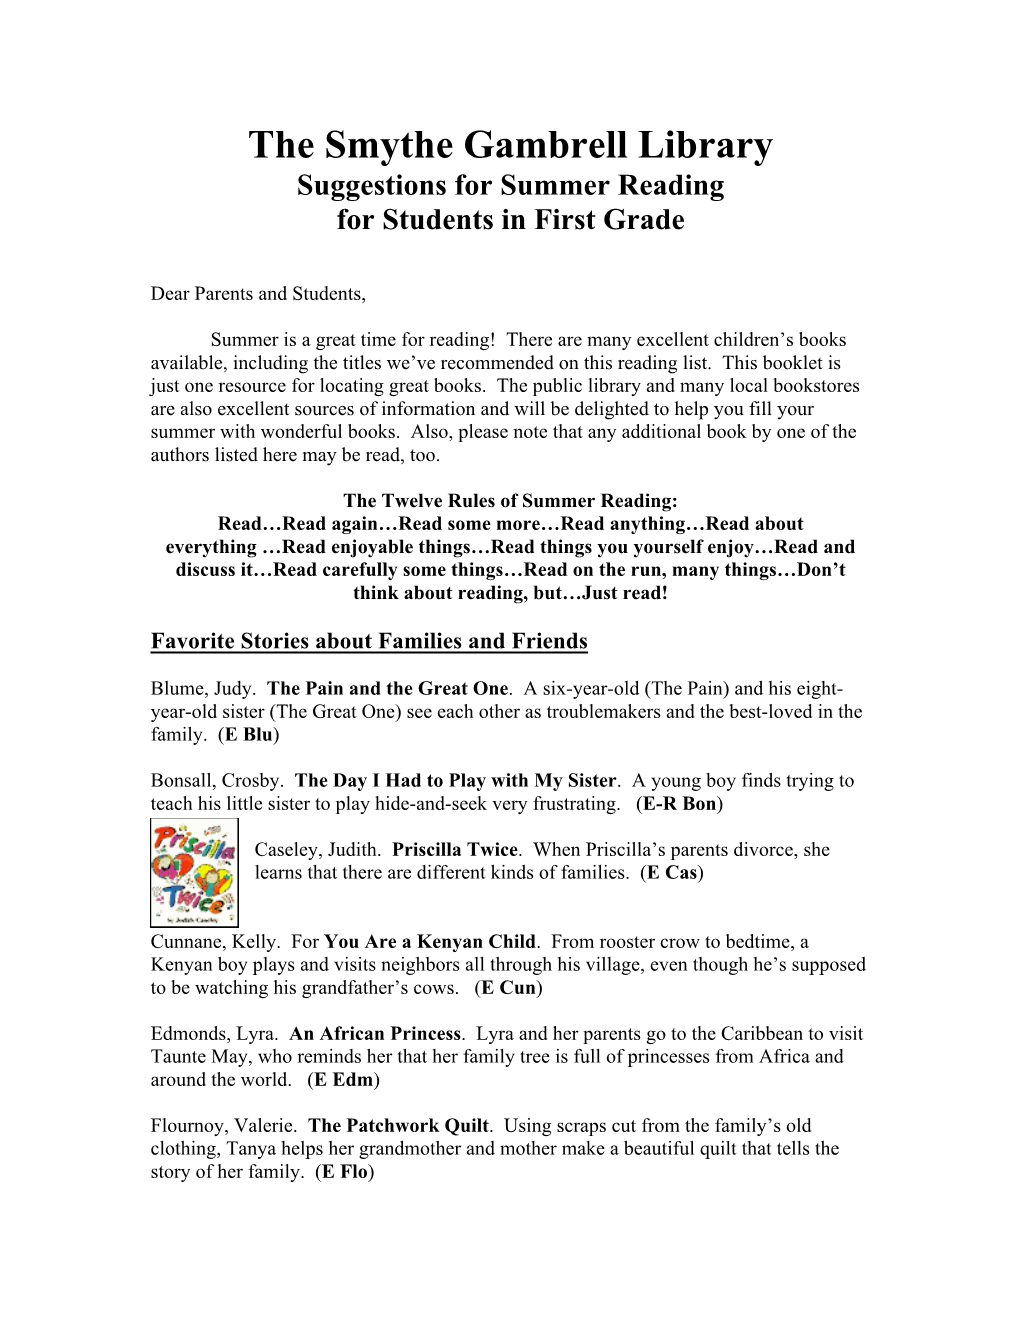 The Smythe Gambrell Library Suggestions for Summer Reading for Students in First Grade